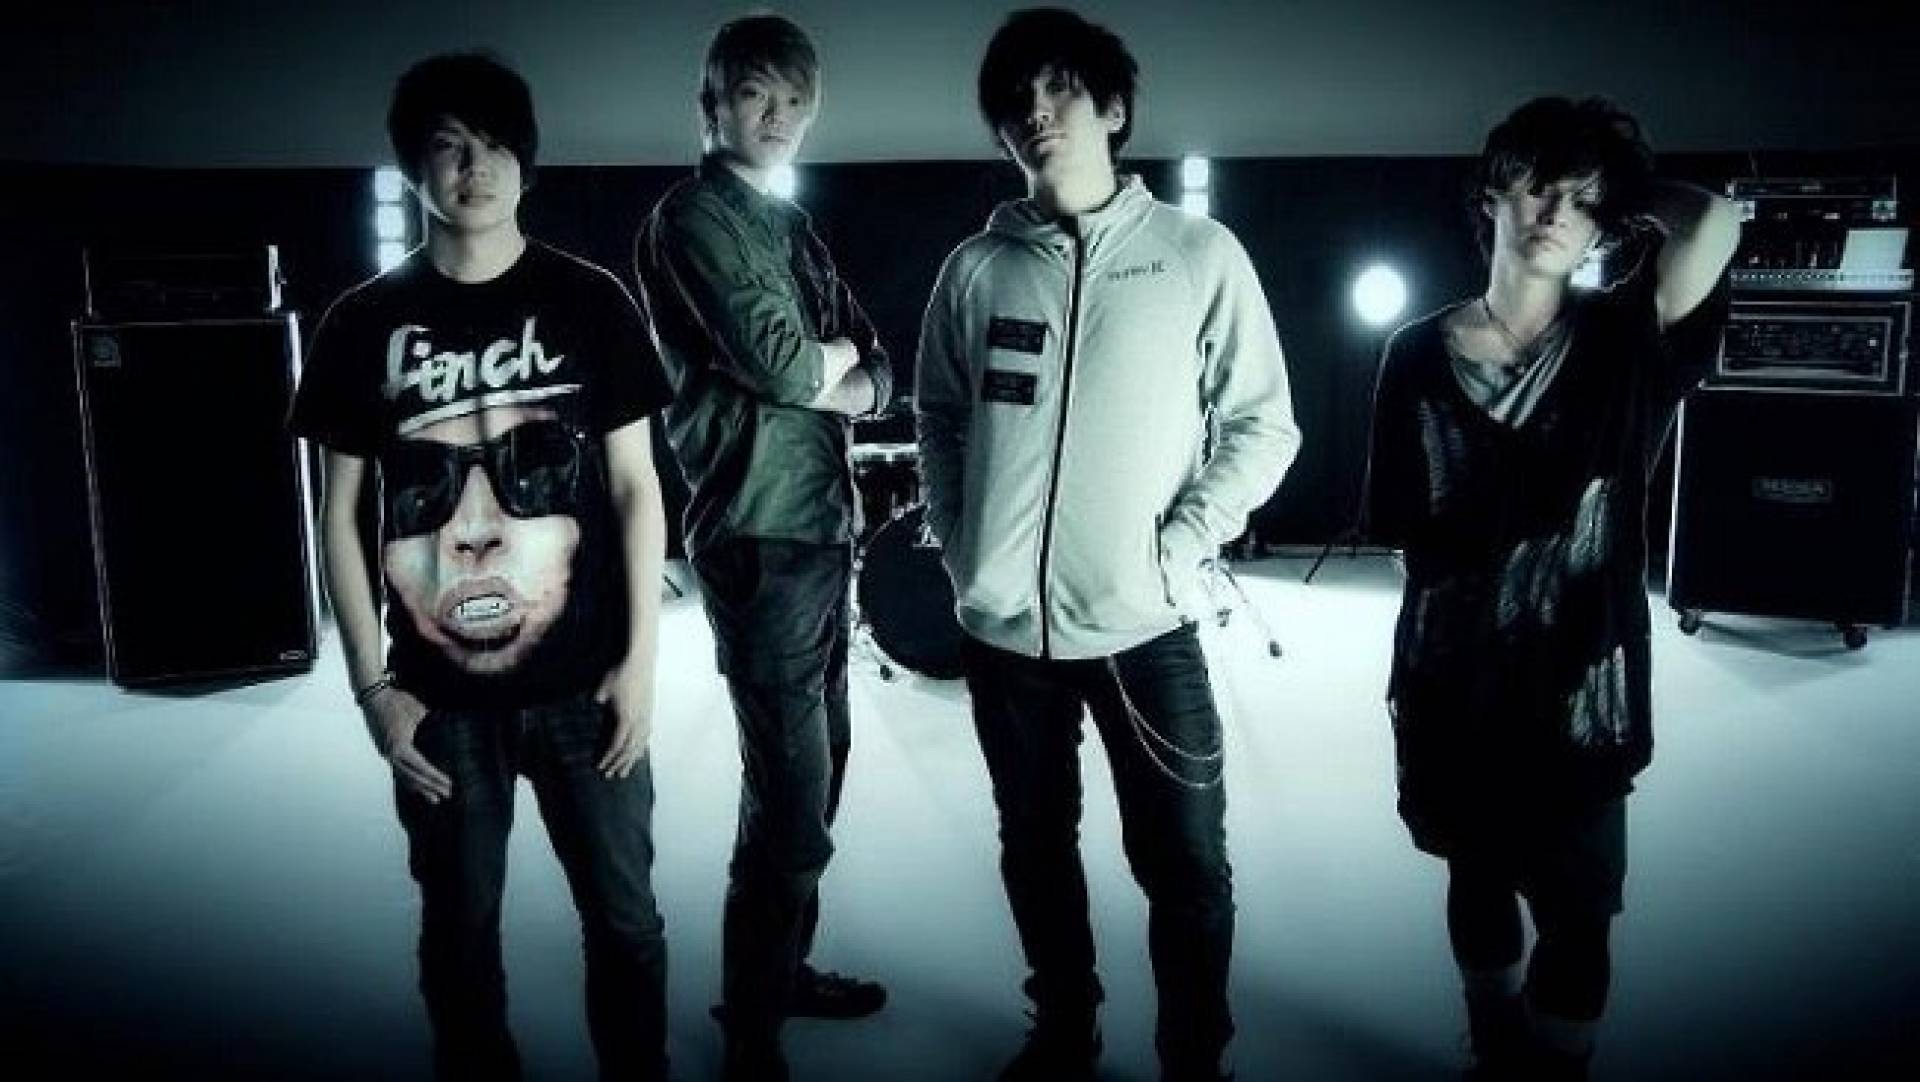 Silhouette from the Skylit